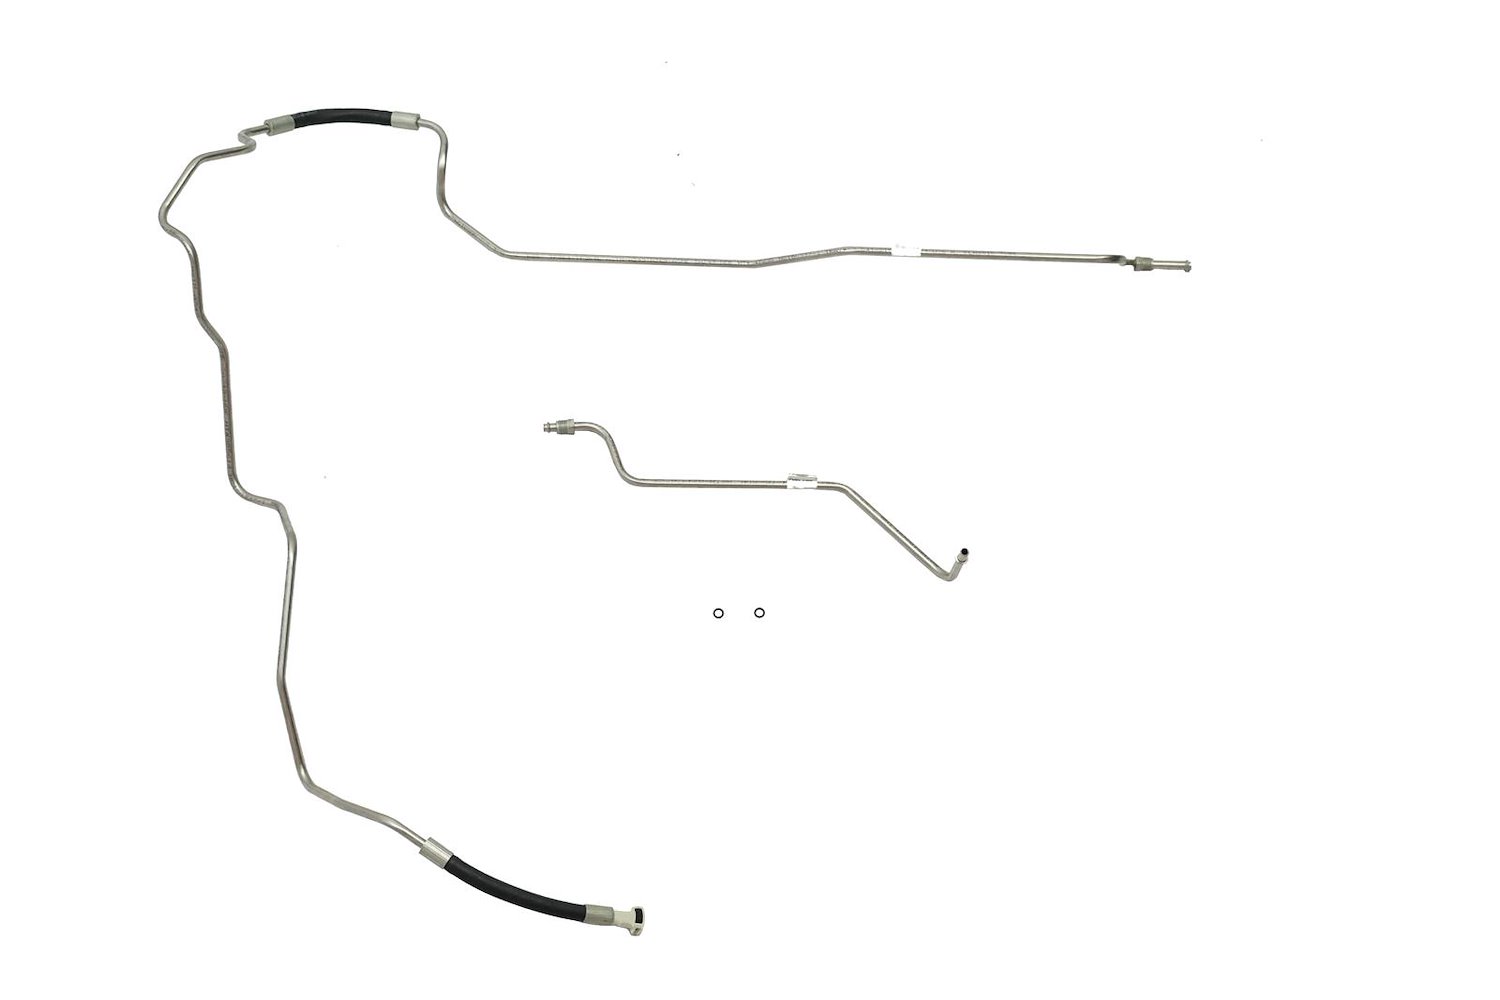 Chevy / GMC Pick Up Fuel Supply Line -2002